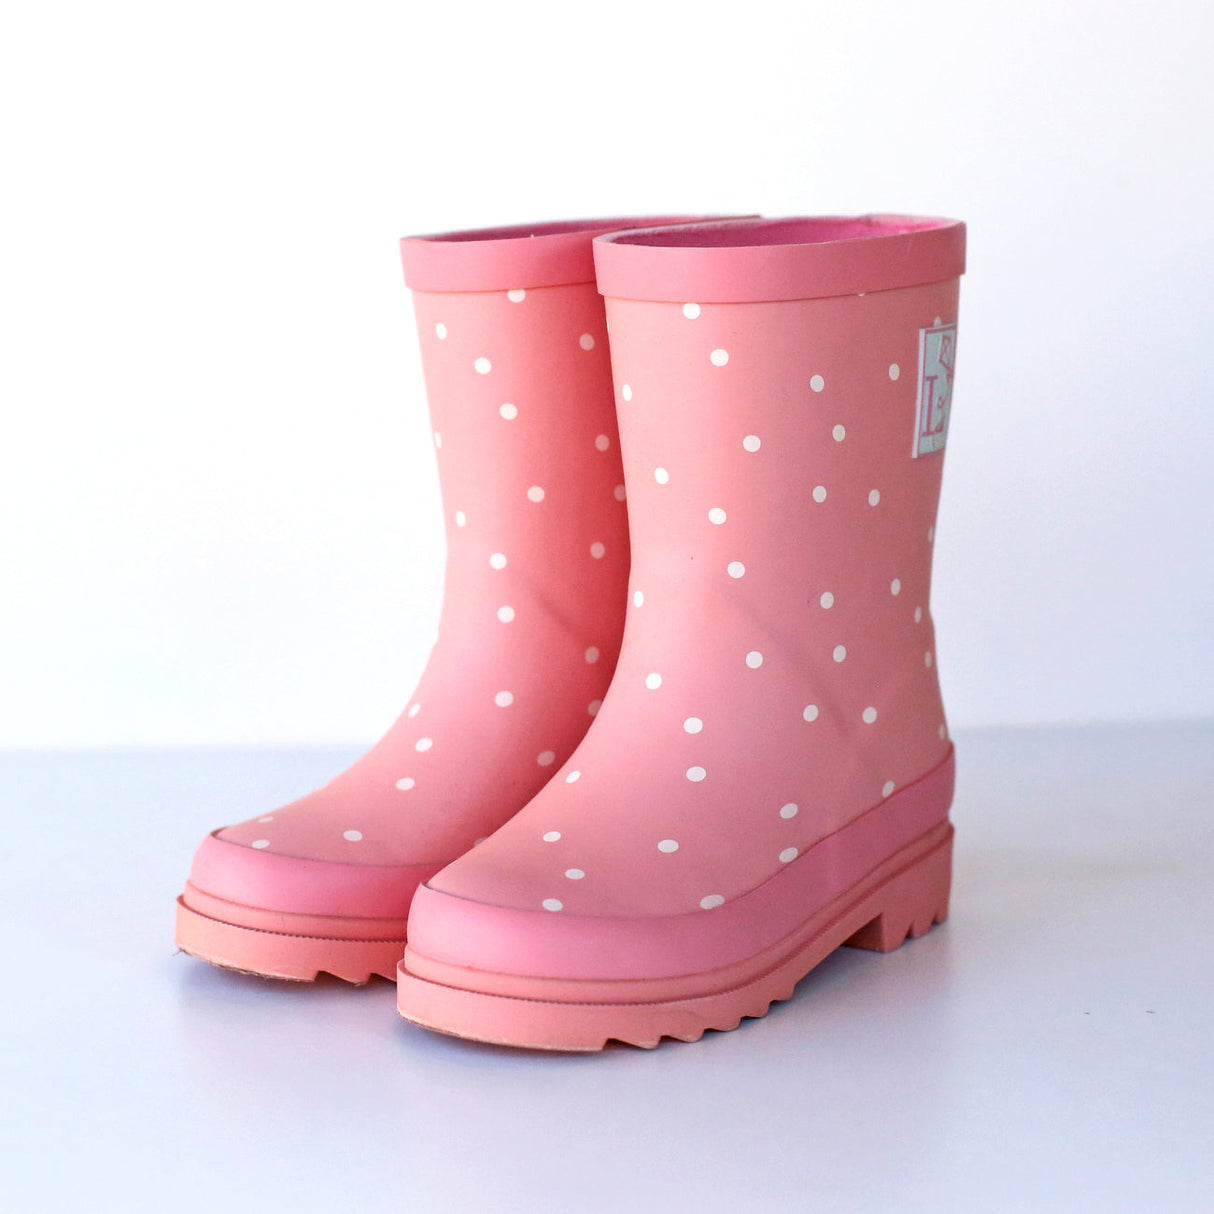 Factory Seconds - Darling Pink Rain Boot by London Littles